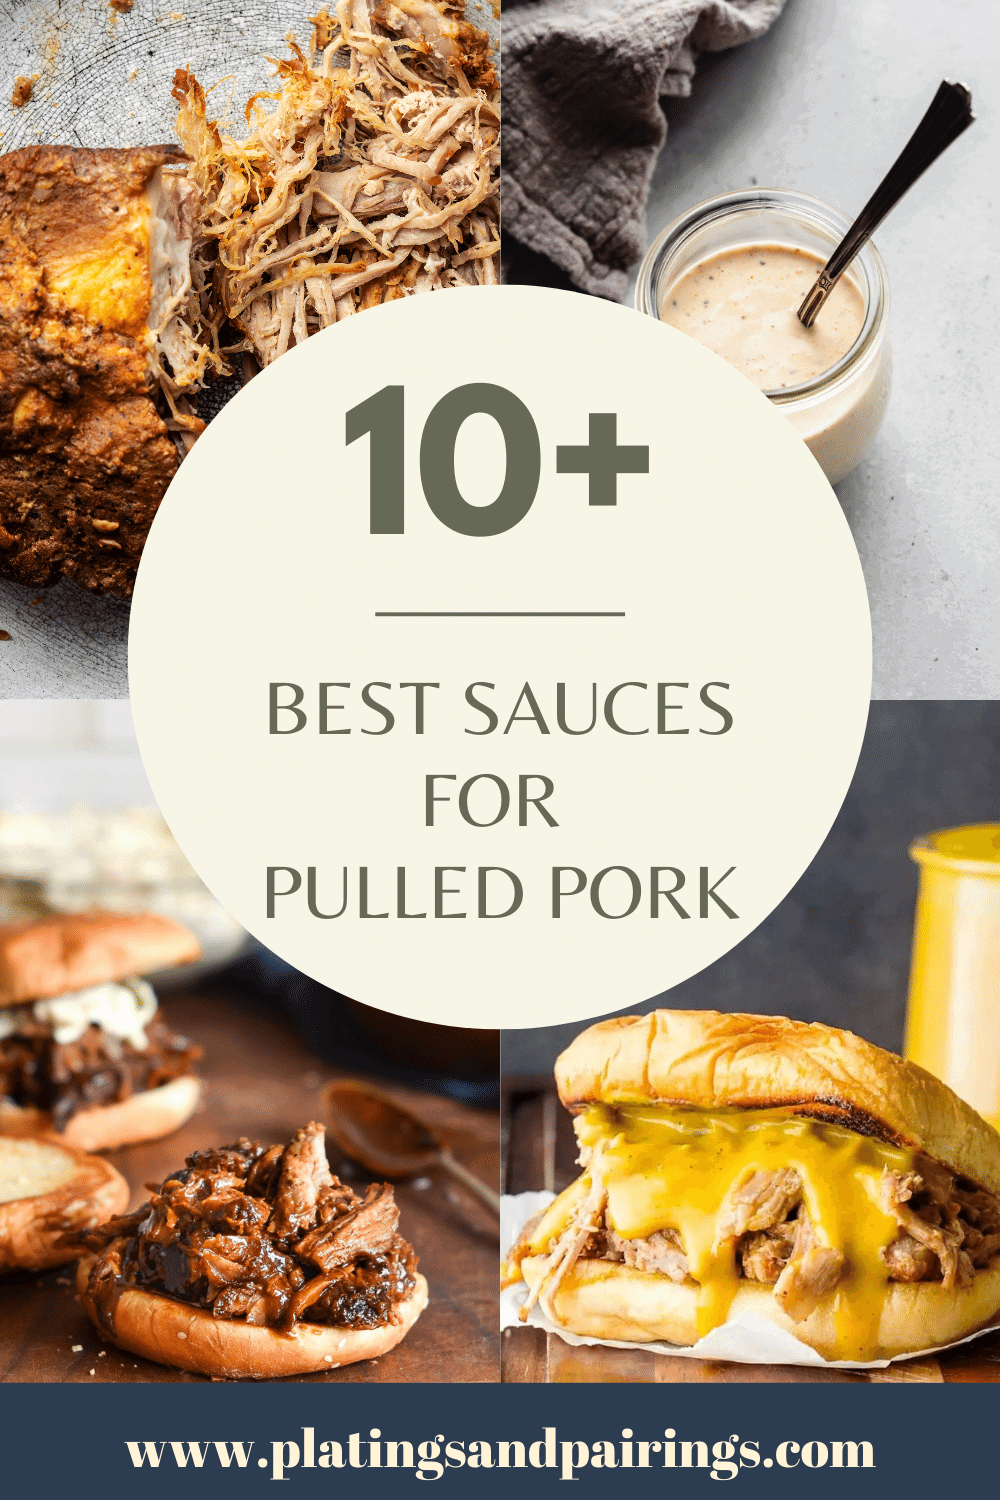 Collage of pulled pork sauces and sandwiches with text overlay - best sauces for pulled pork.